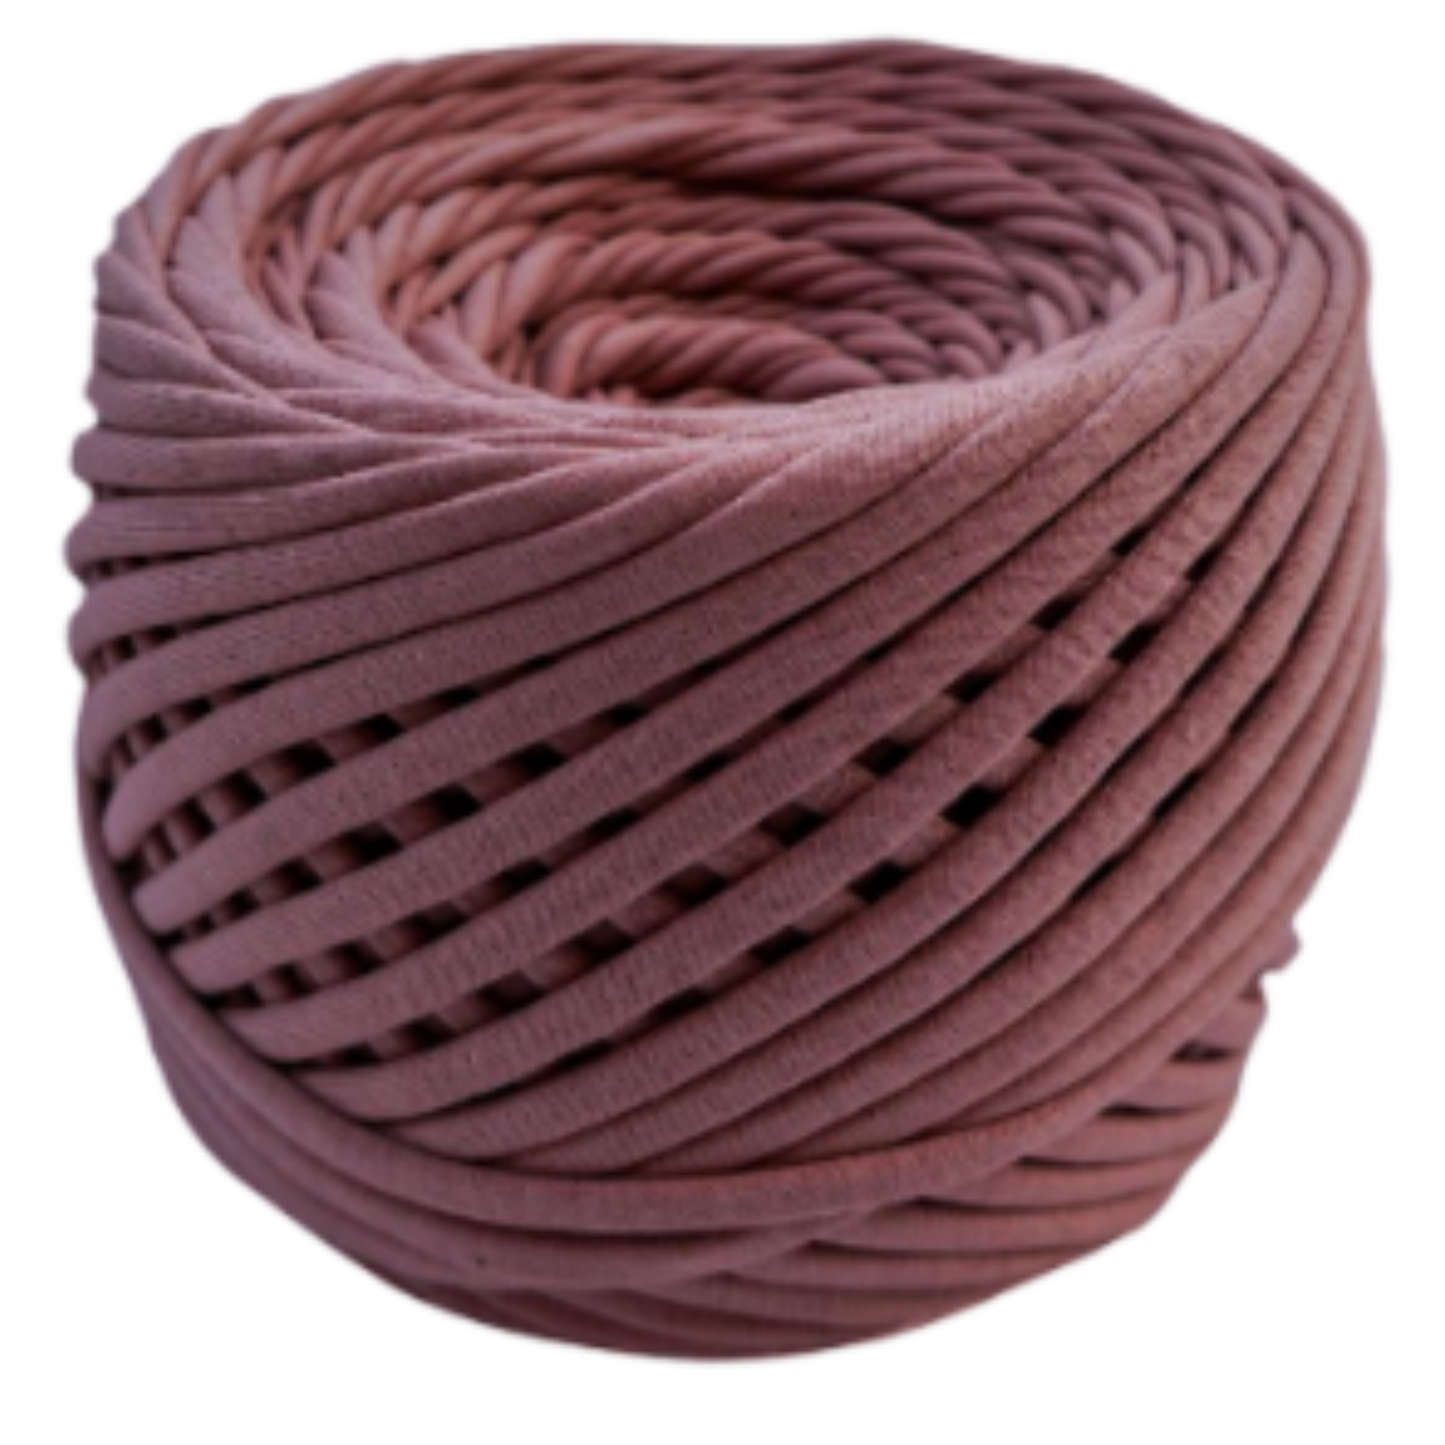 T-shirt yarn for crocheting baskets, bags, rugs and home decor. Tan